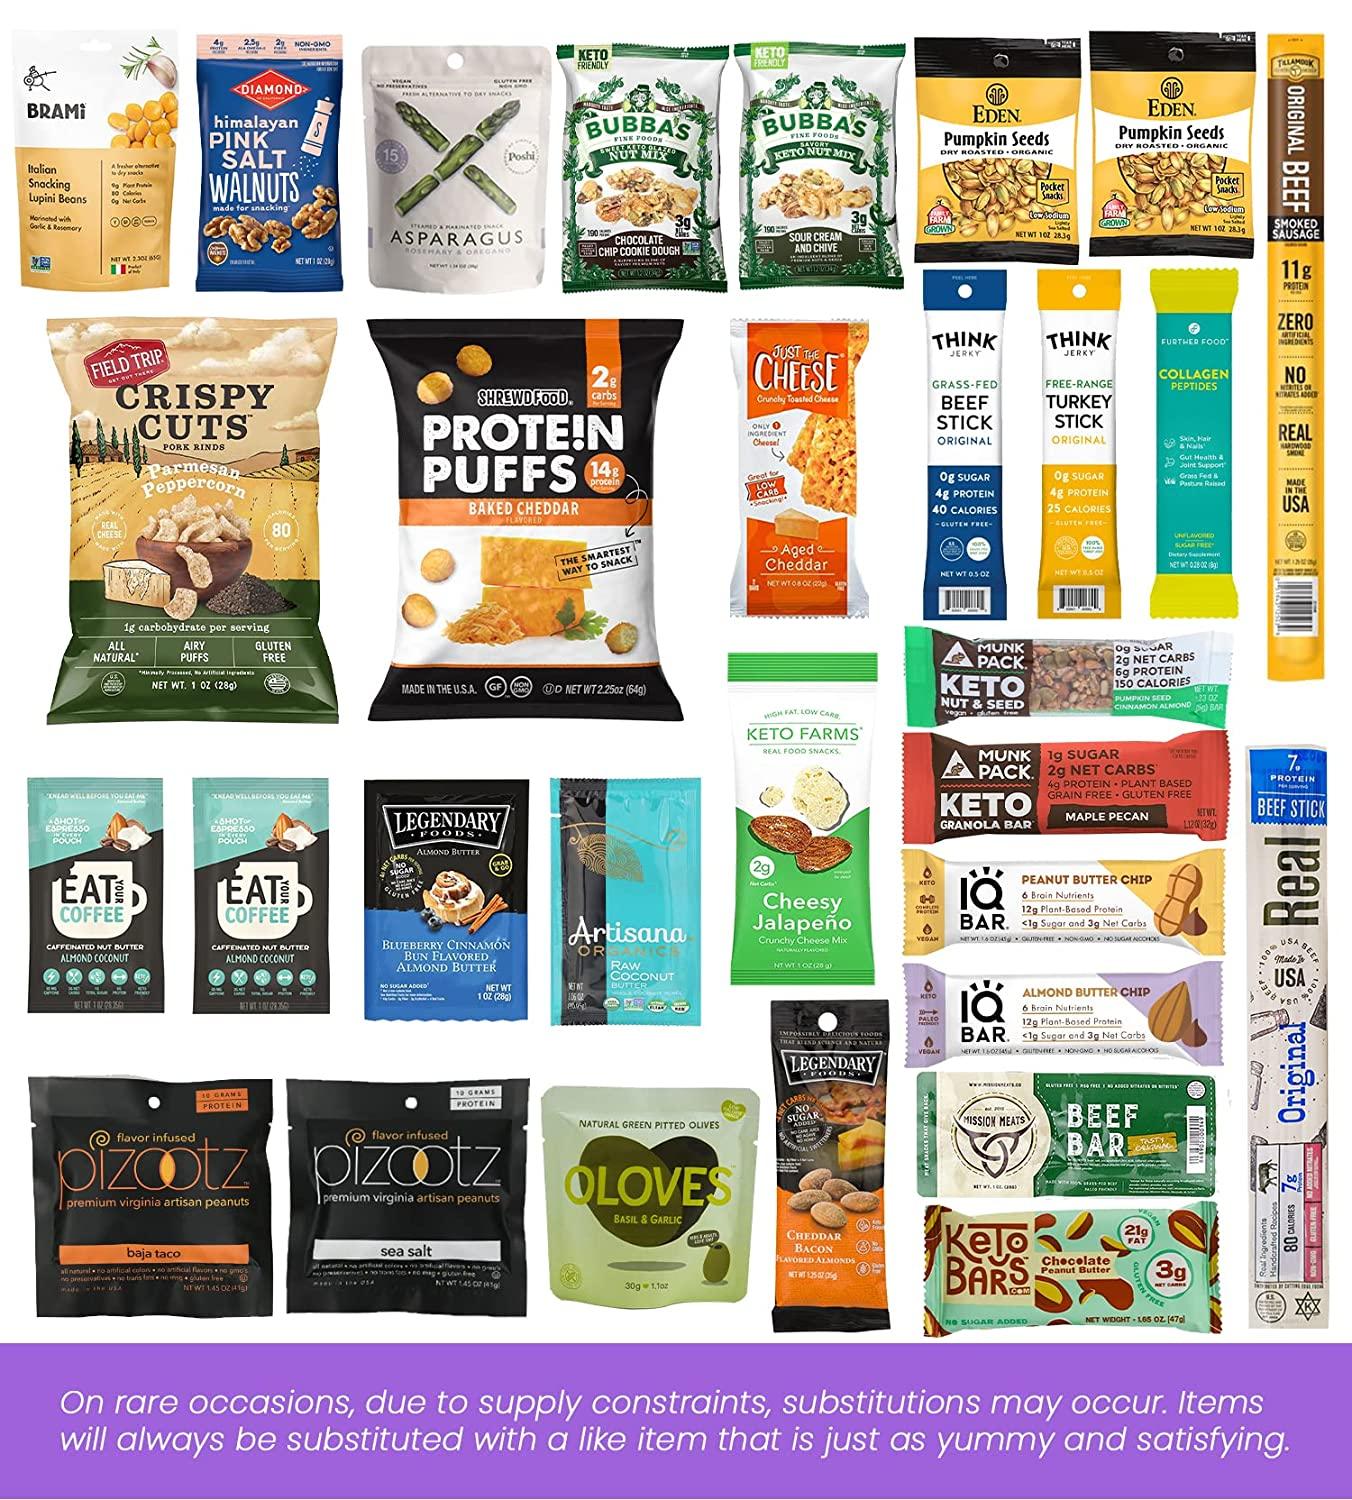 Ultimate Keto Snack Box Sampler Gift Low Carb (5G or less) Low